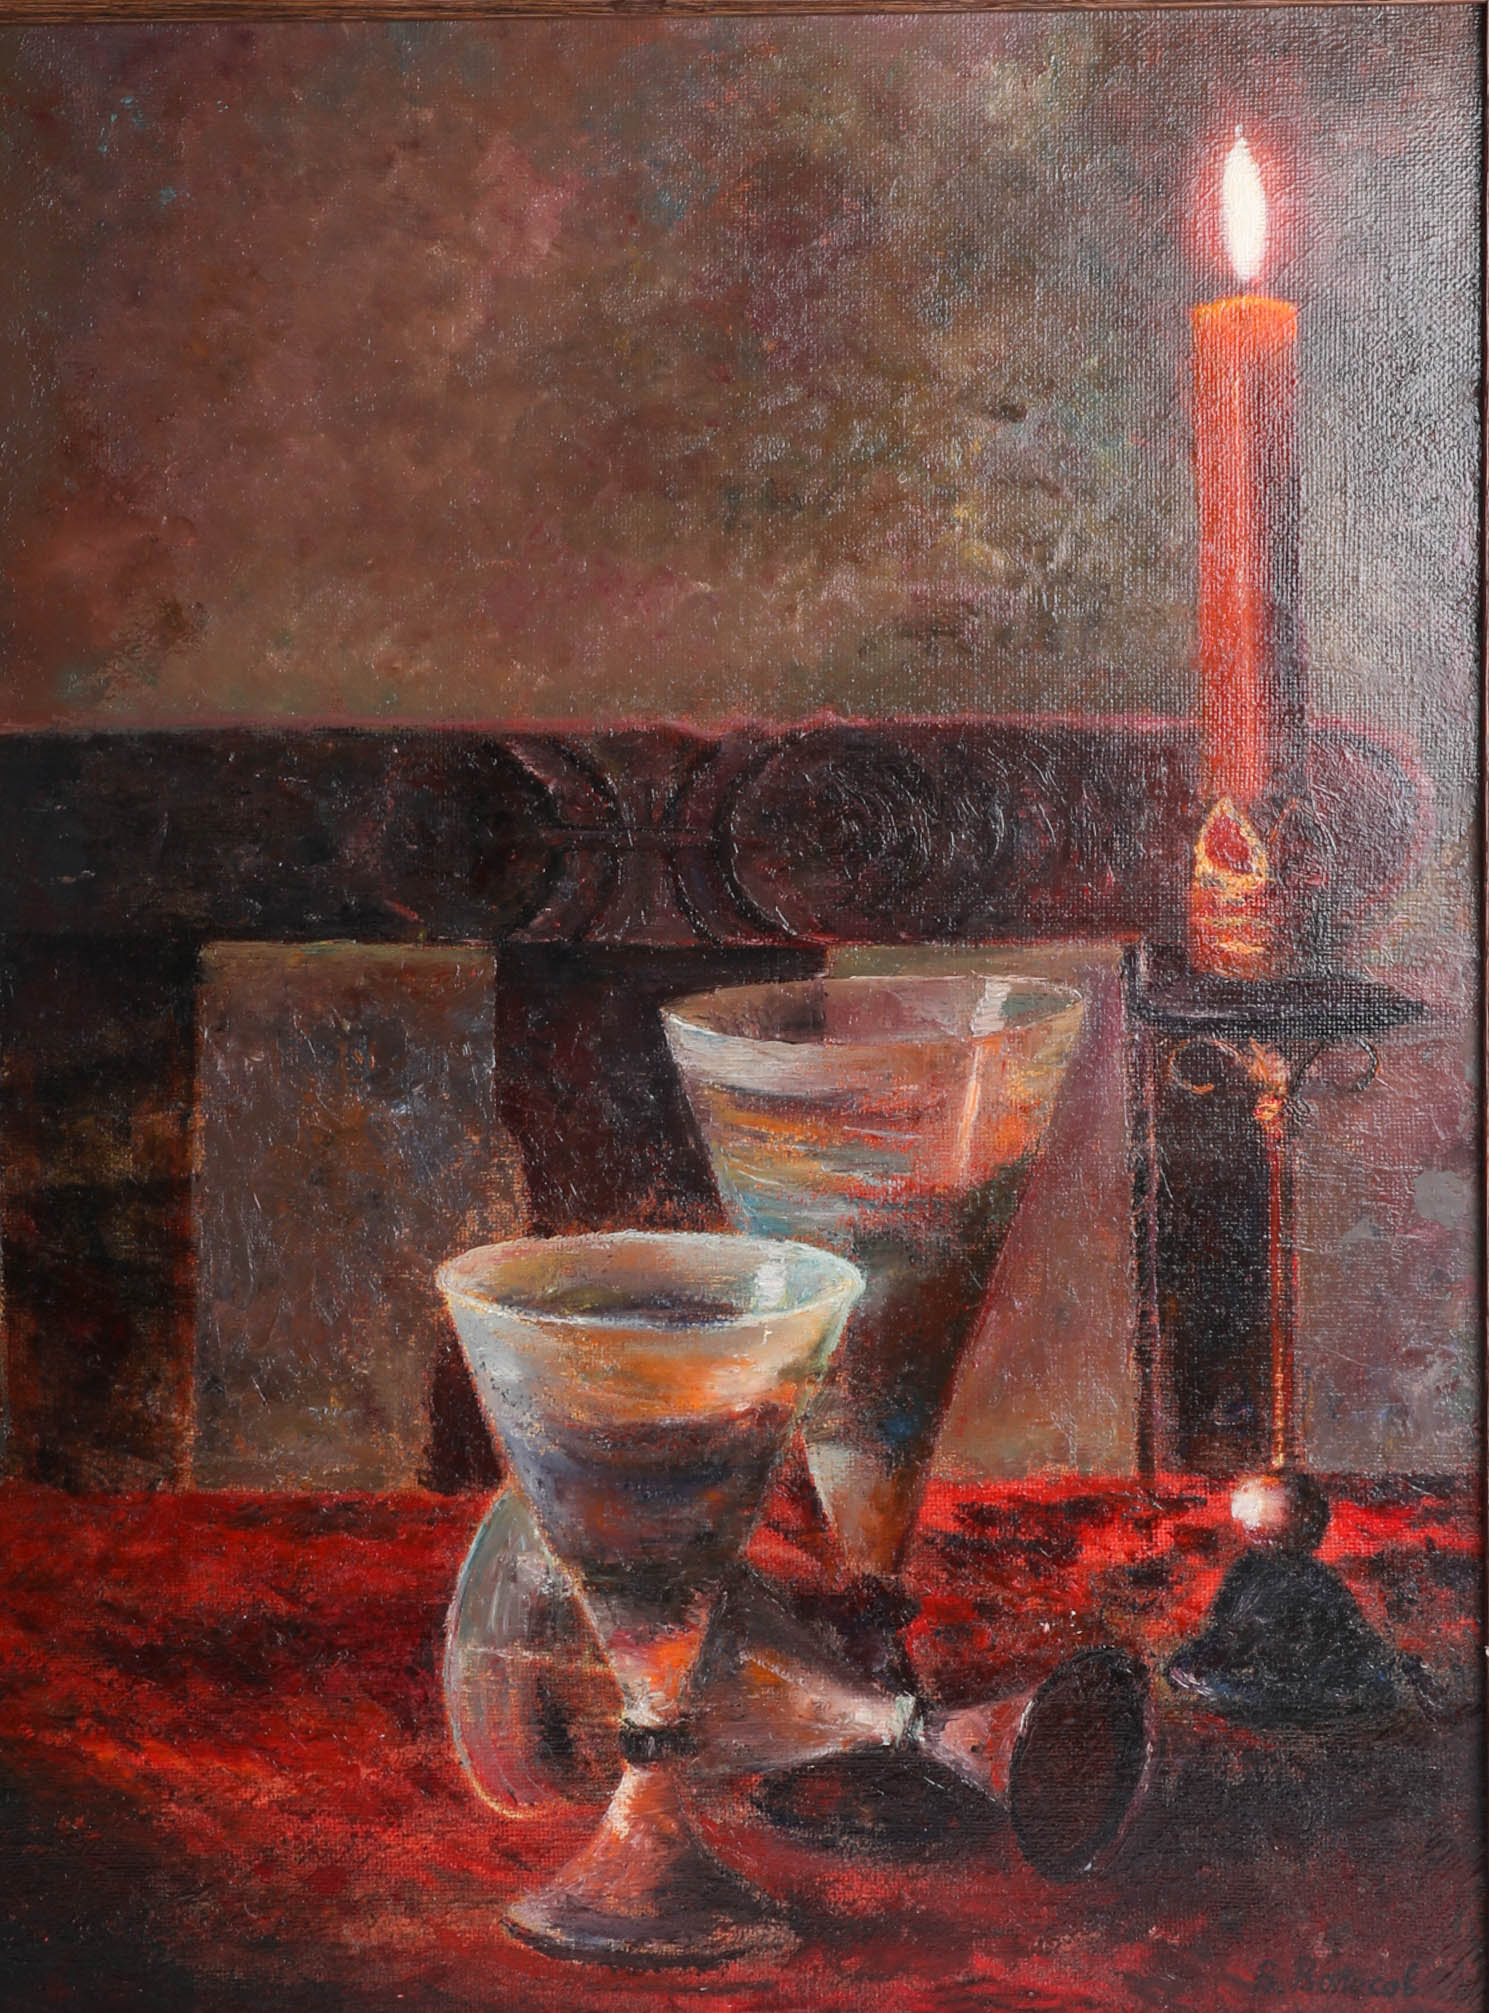 Vladimir Volosov 'Still Life with Candle' oil on canvas, 2001, signed, framed, 60cm x 45cm. - Image 2 of 2